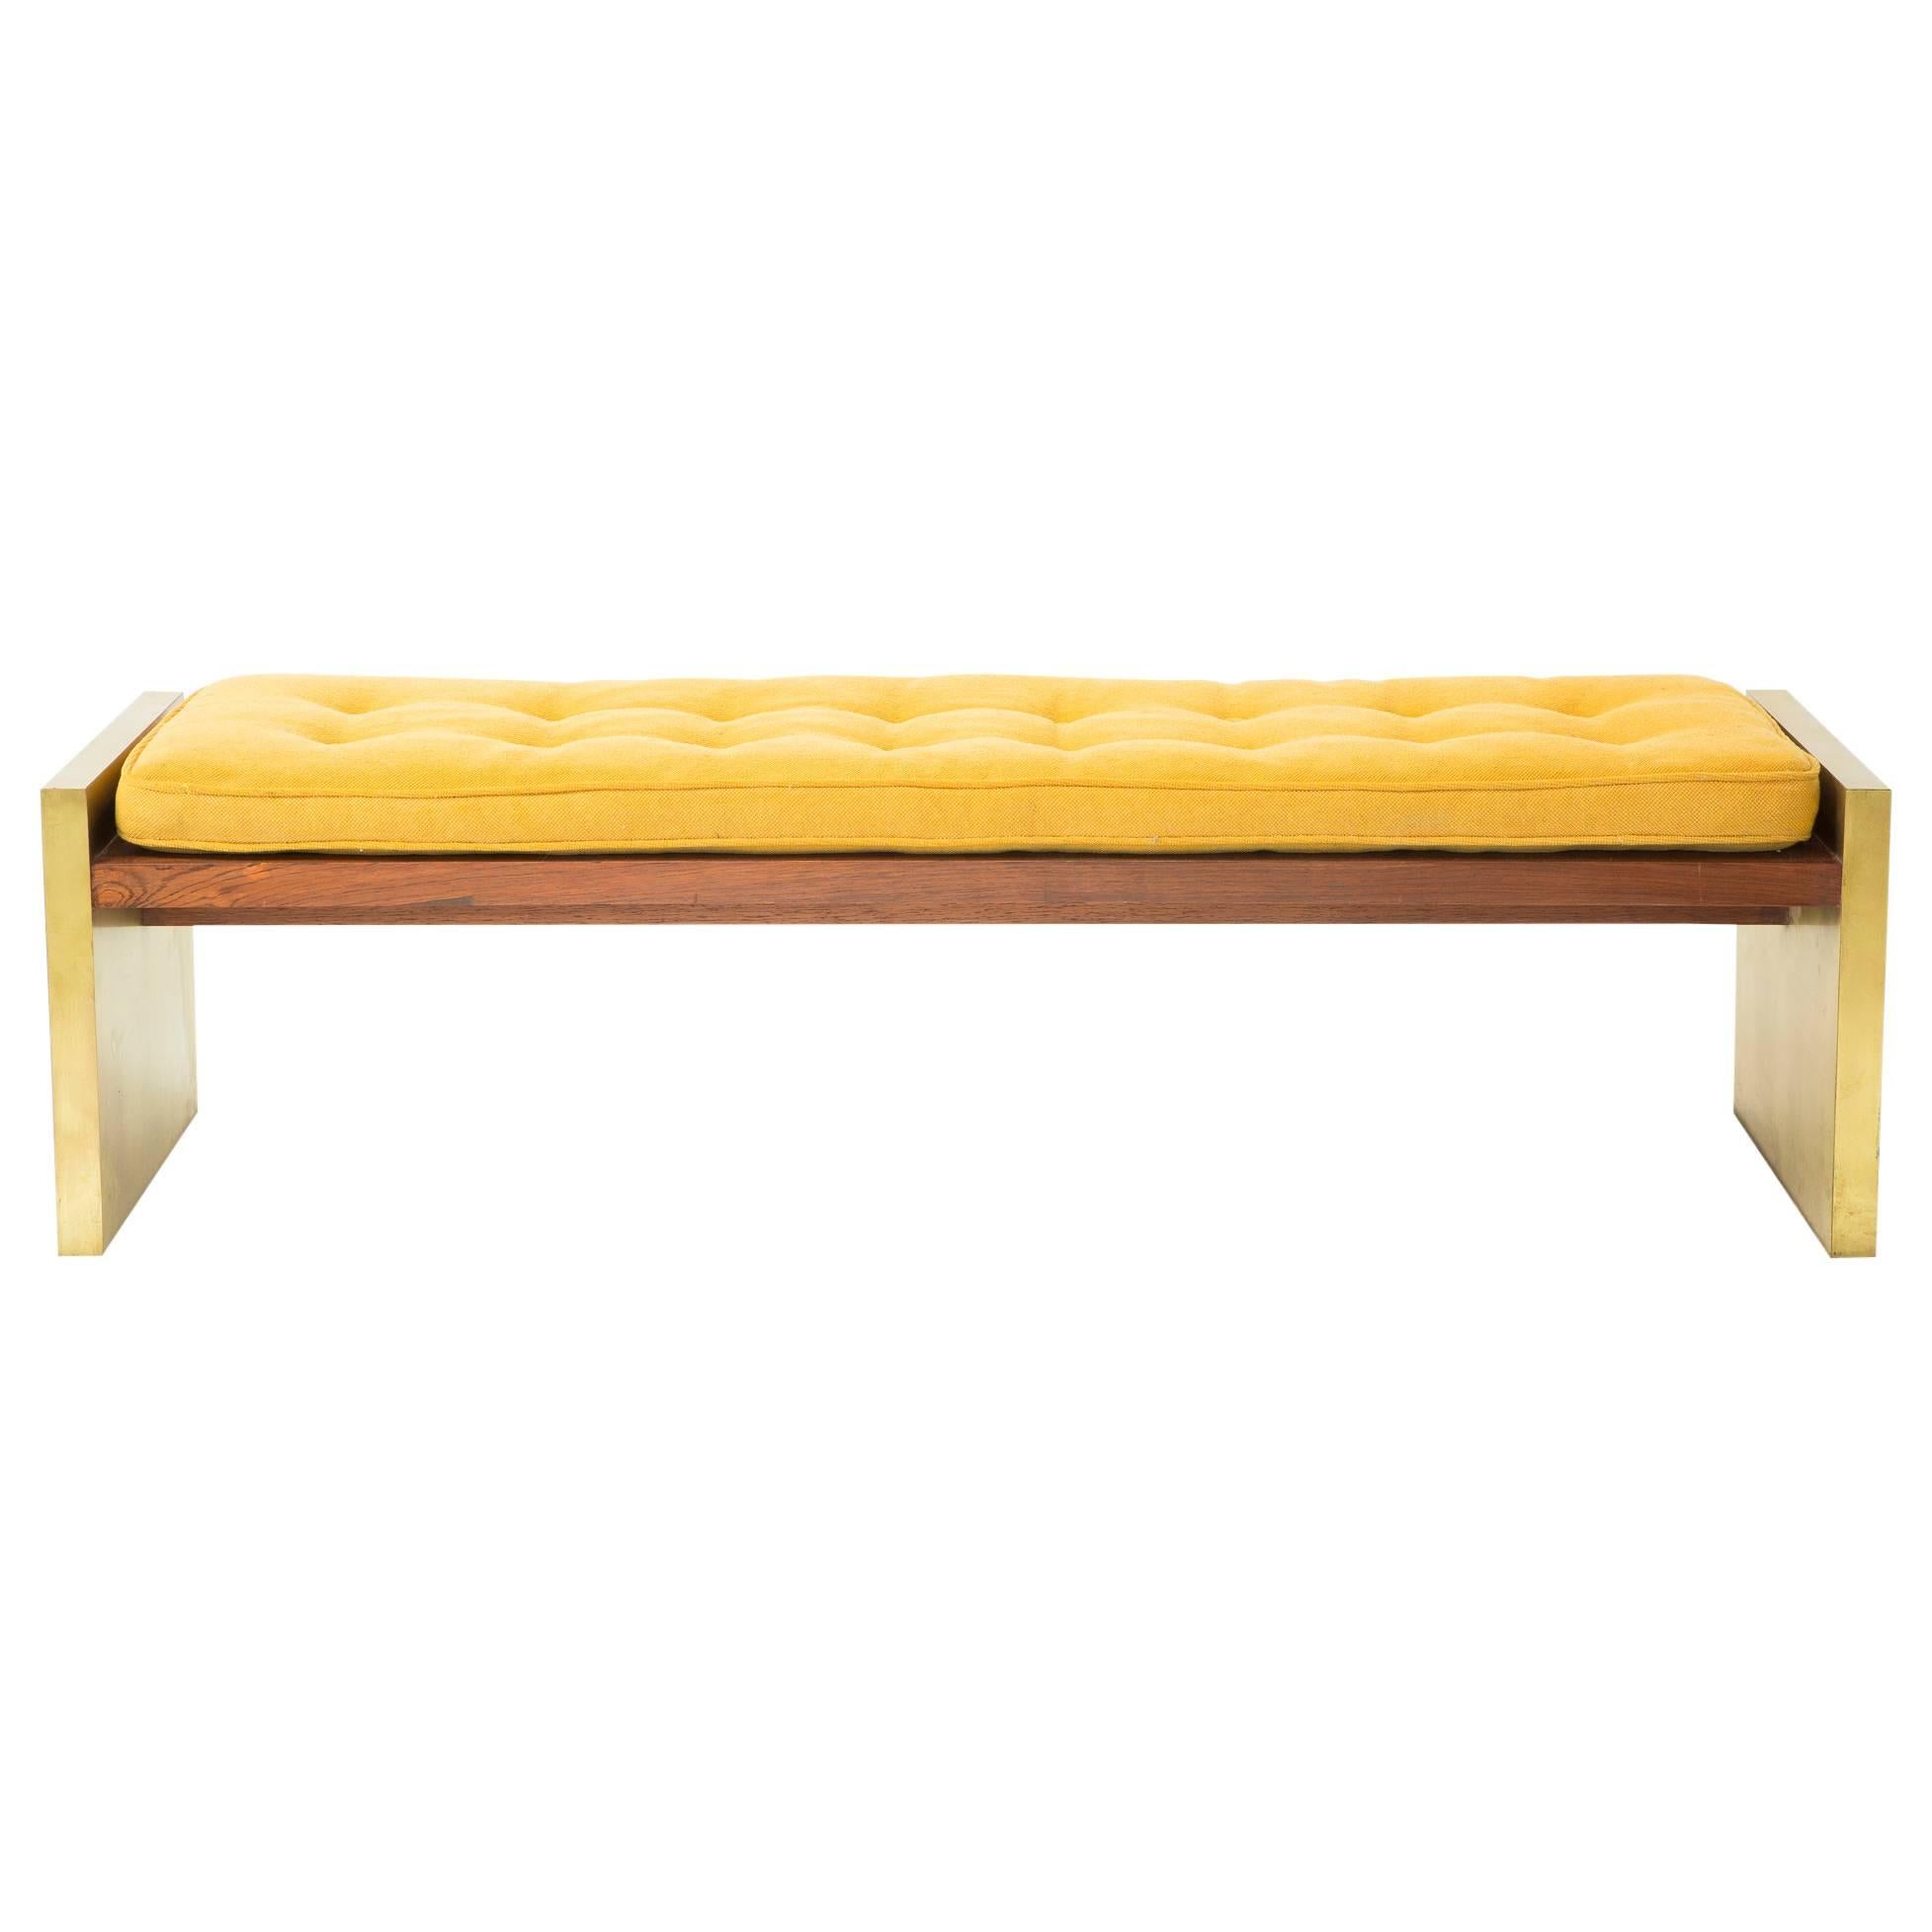 Brass and Rosewood Window Bench by Roger Sprunger for Dunbar 1